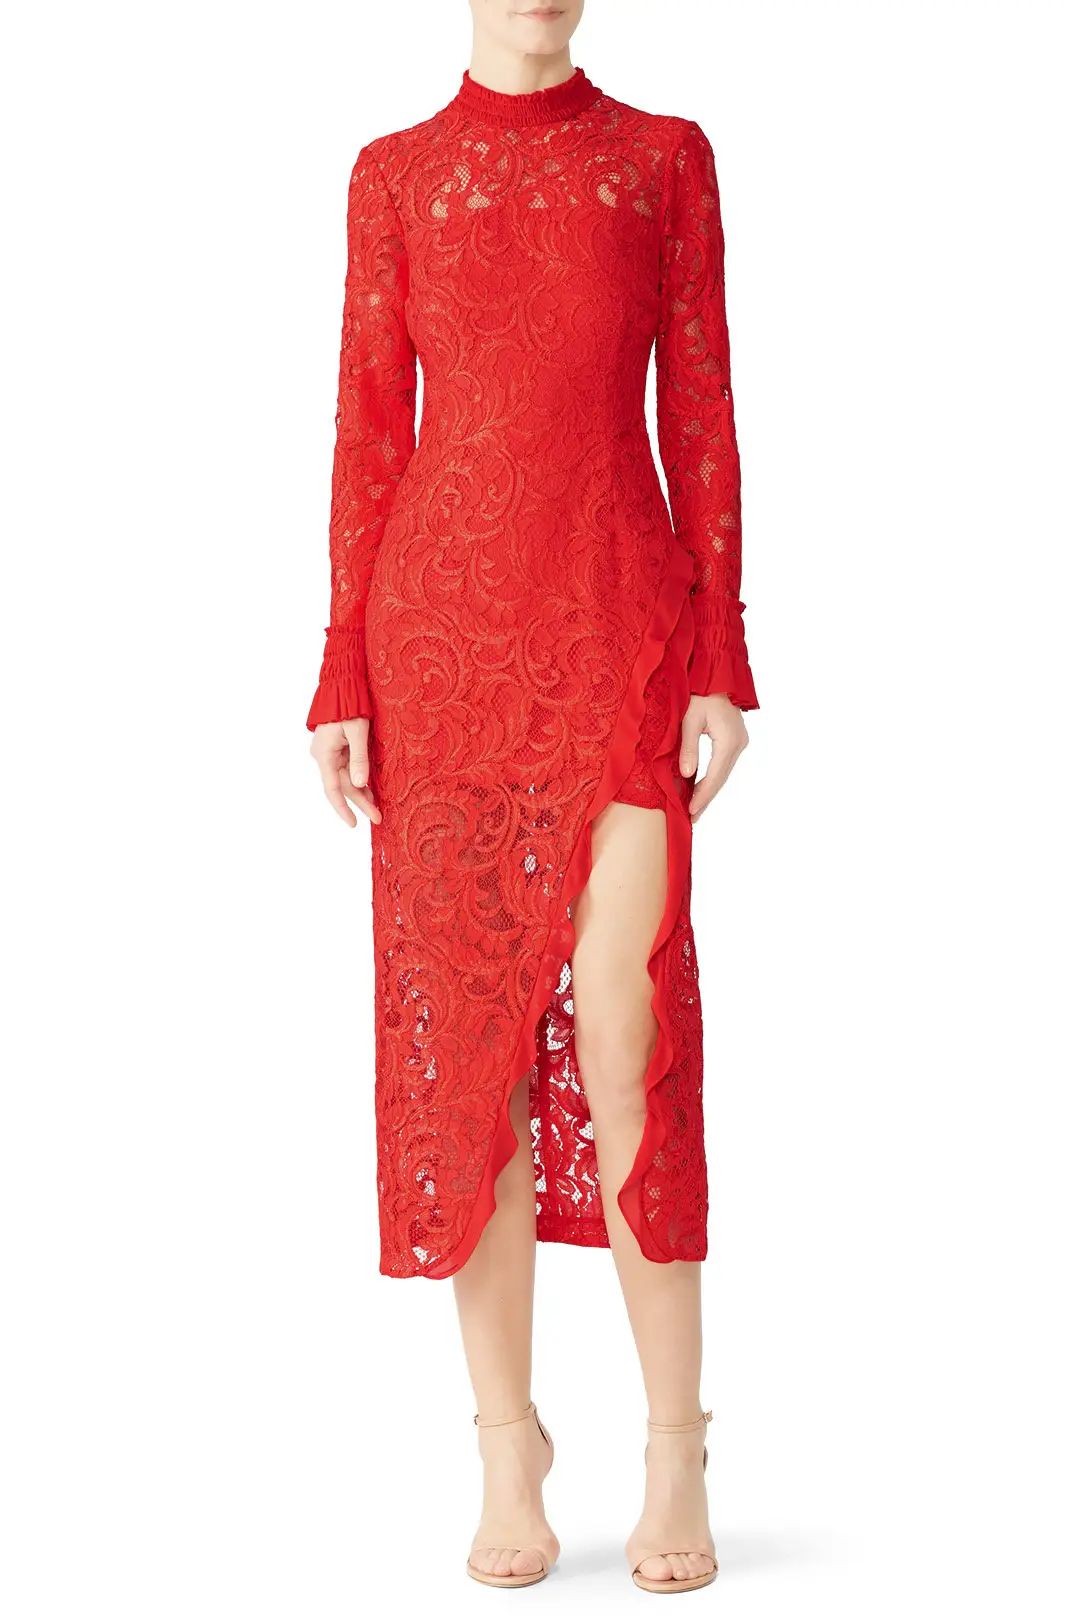 Alexis Red Fala Lace Dress | Rent The Runway